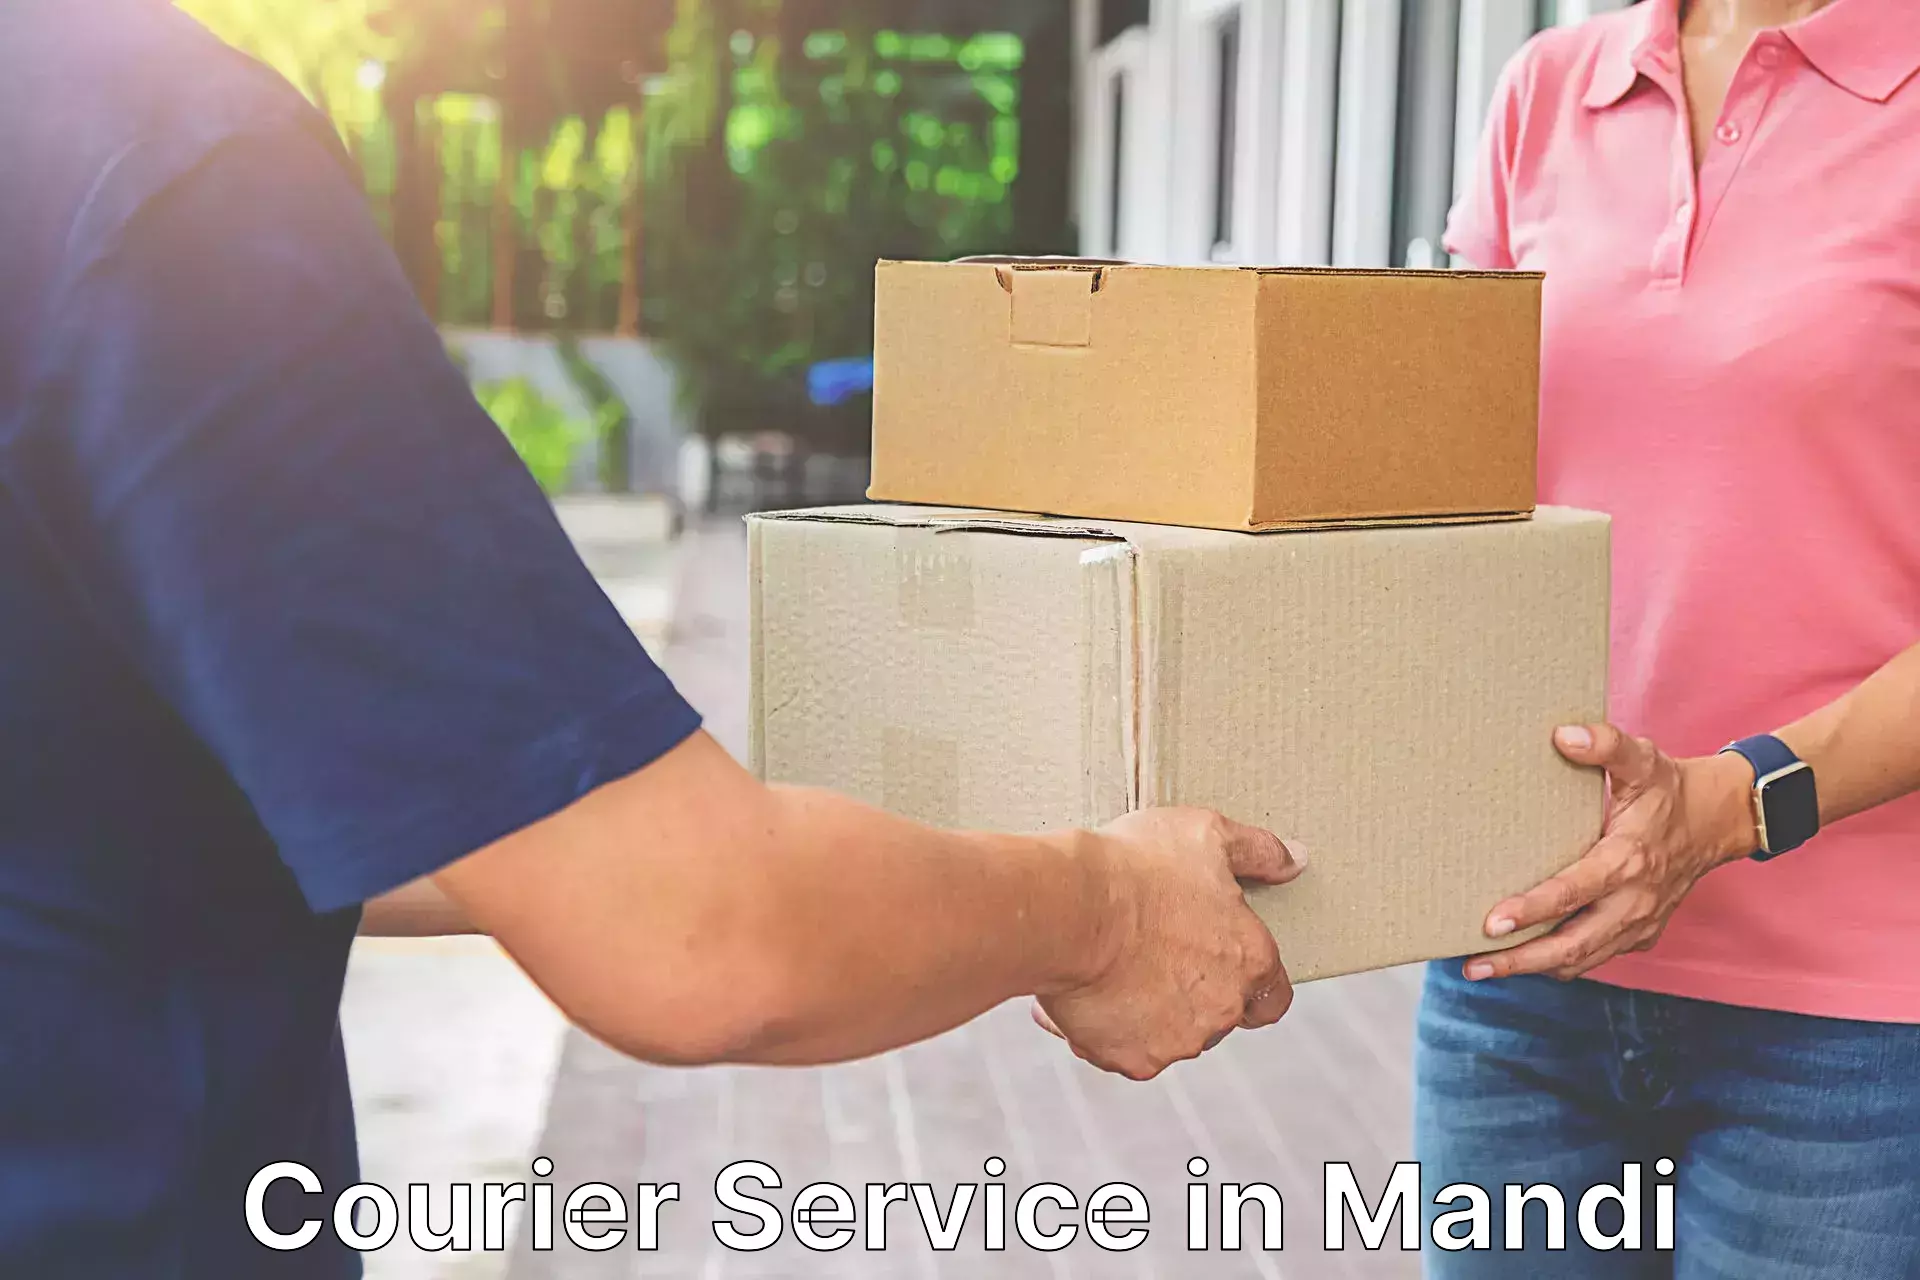 Flexible delivery schedules in Mandi